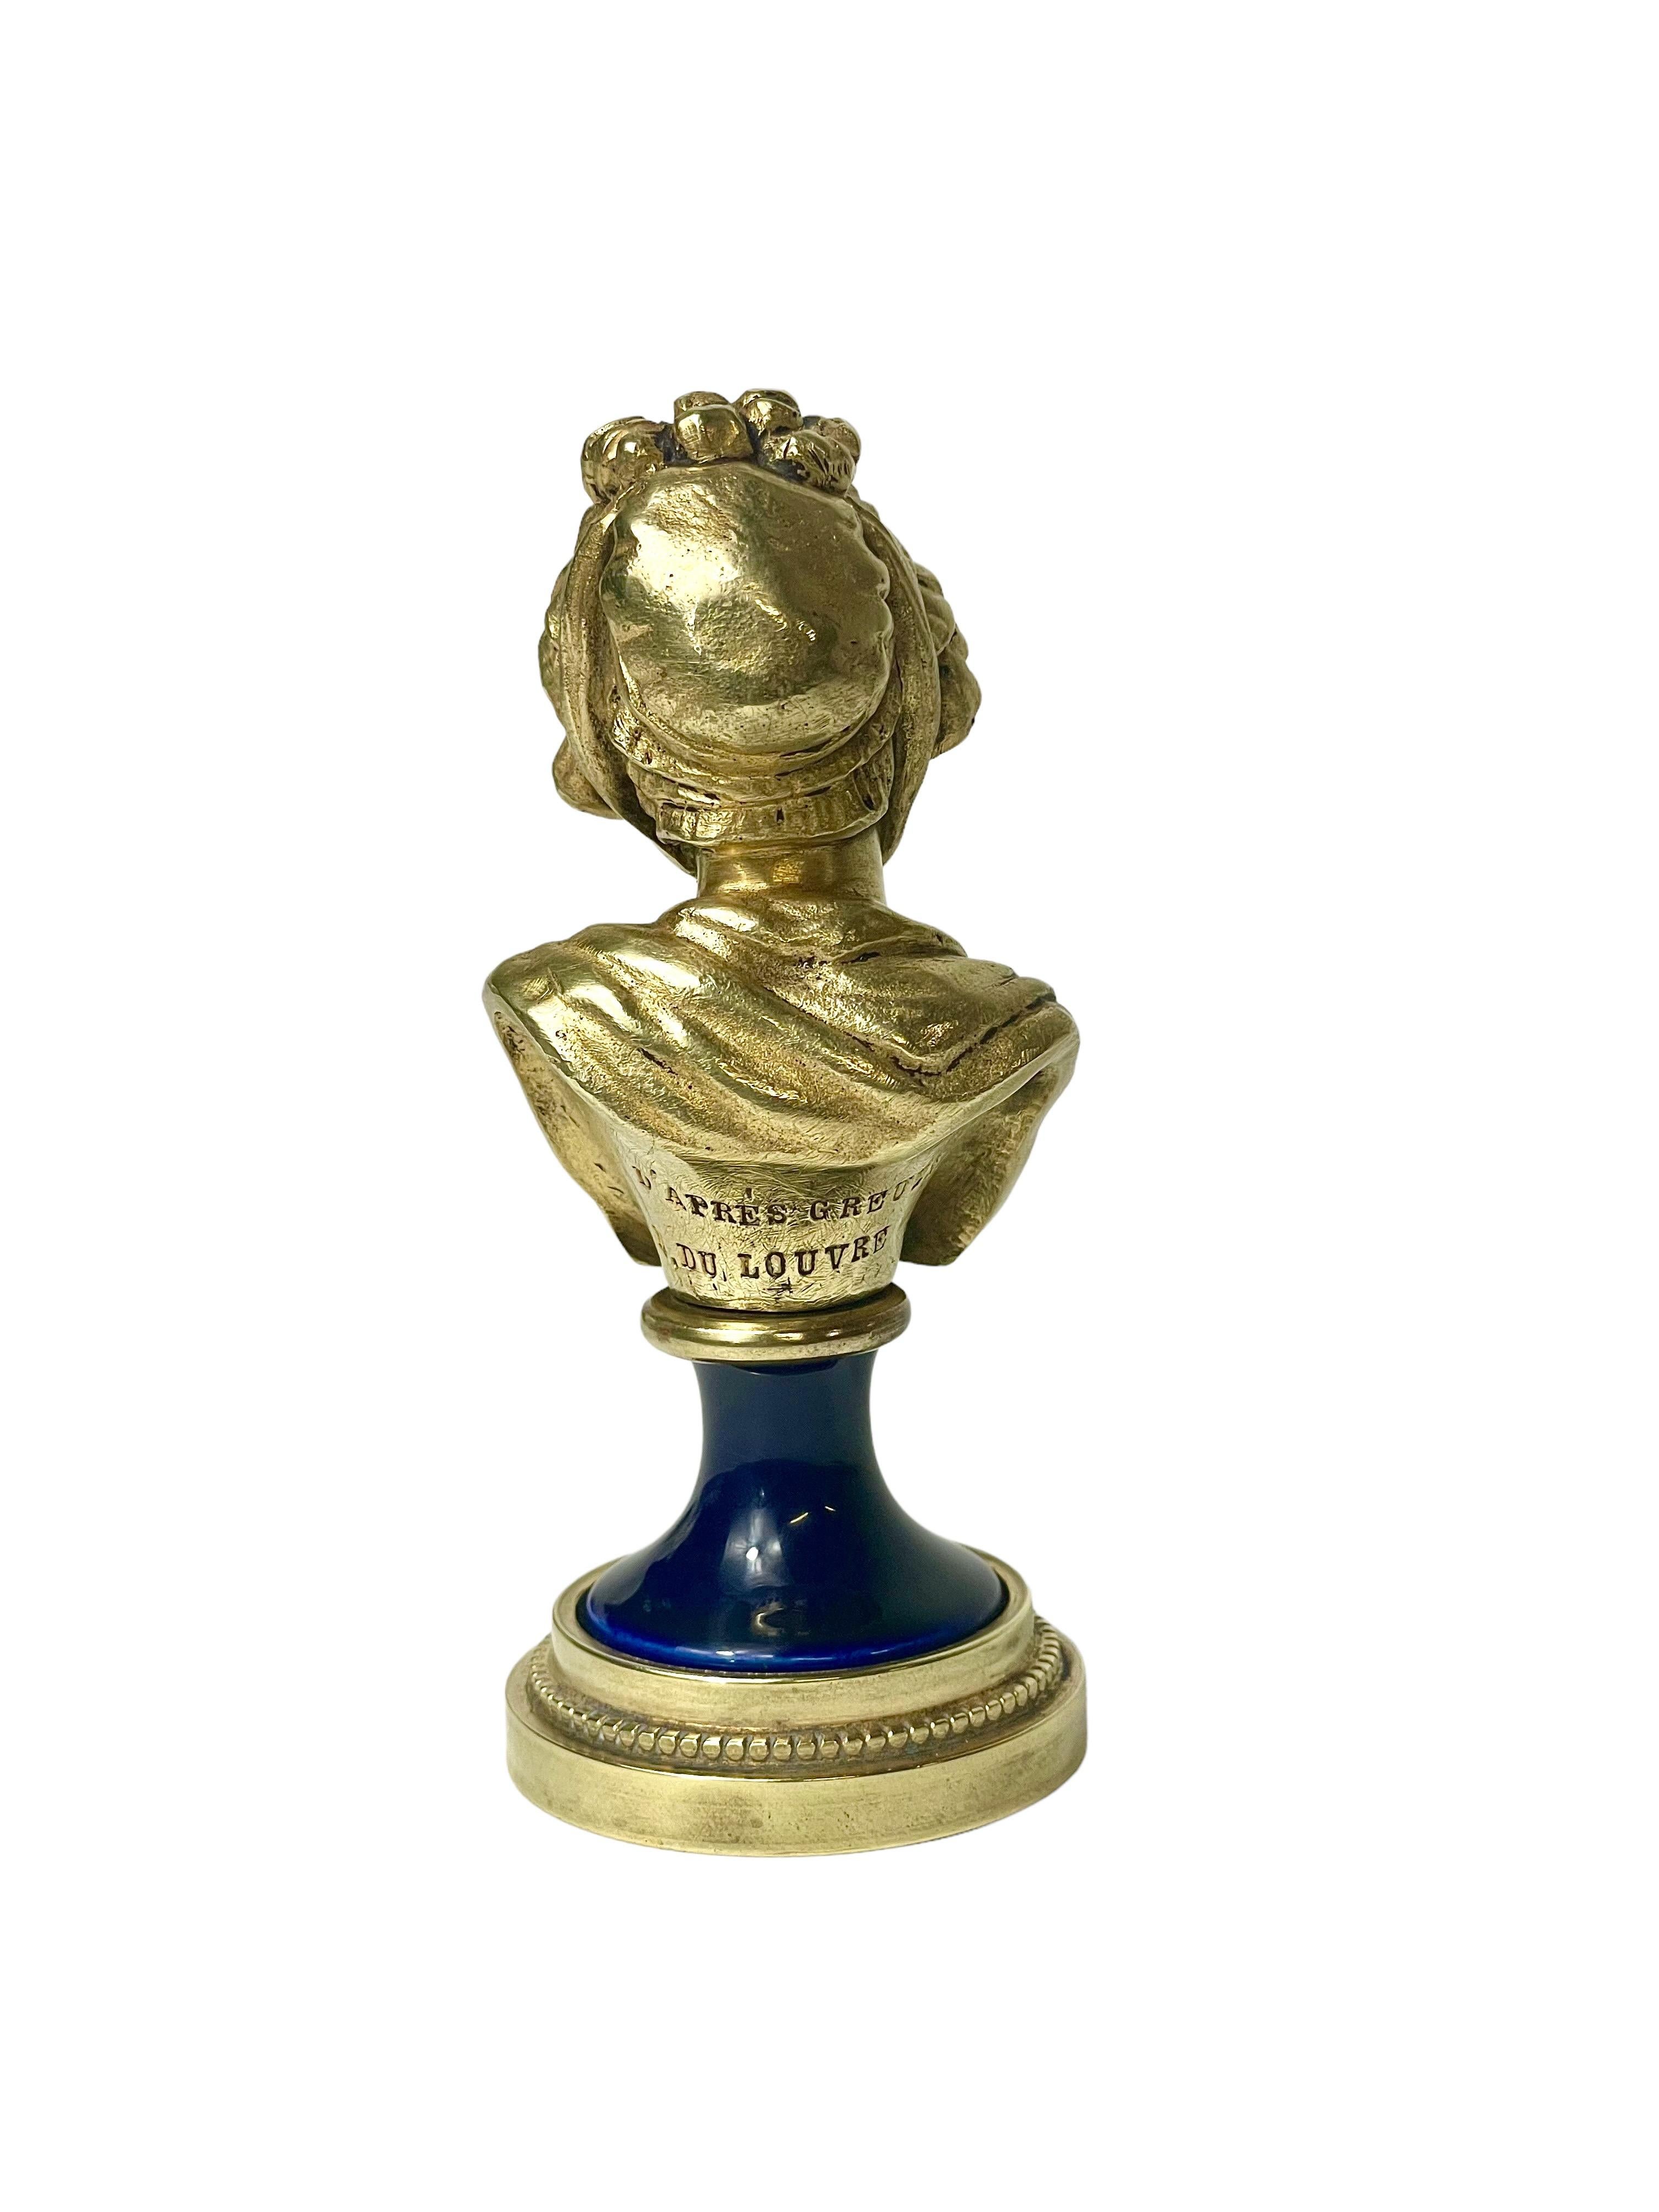 A lovely gilt bronze bust depicting an elegant young lady, with fashionable frilled bonnet, finely draped clothing and a serene expression. Mounted on a deep blue porcelain and bronze base, the Louis XVI style statuette (circa 1900) is inscribed on